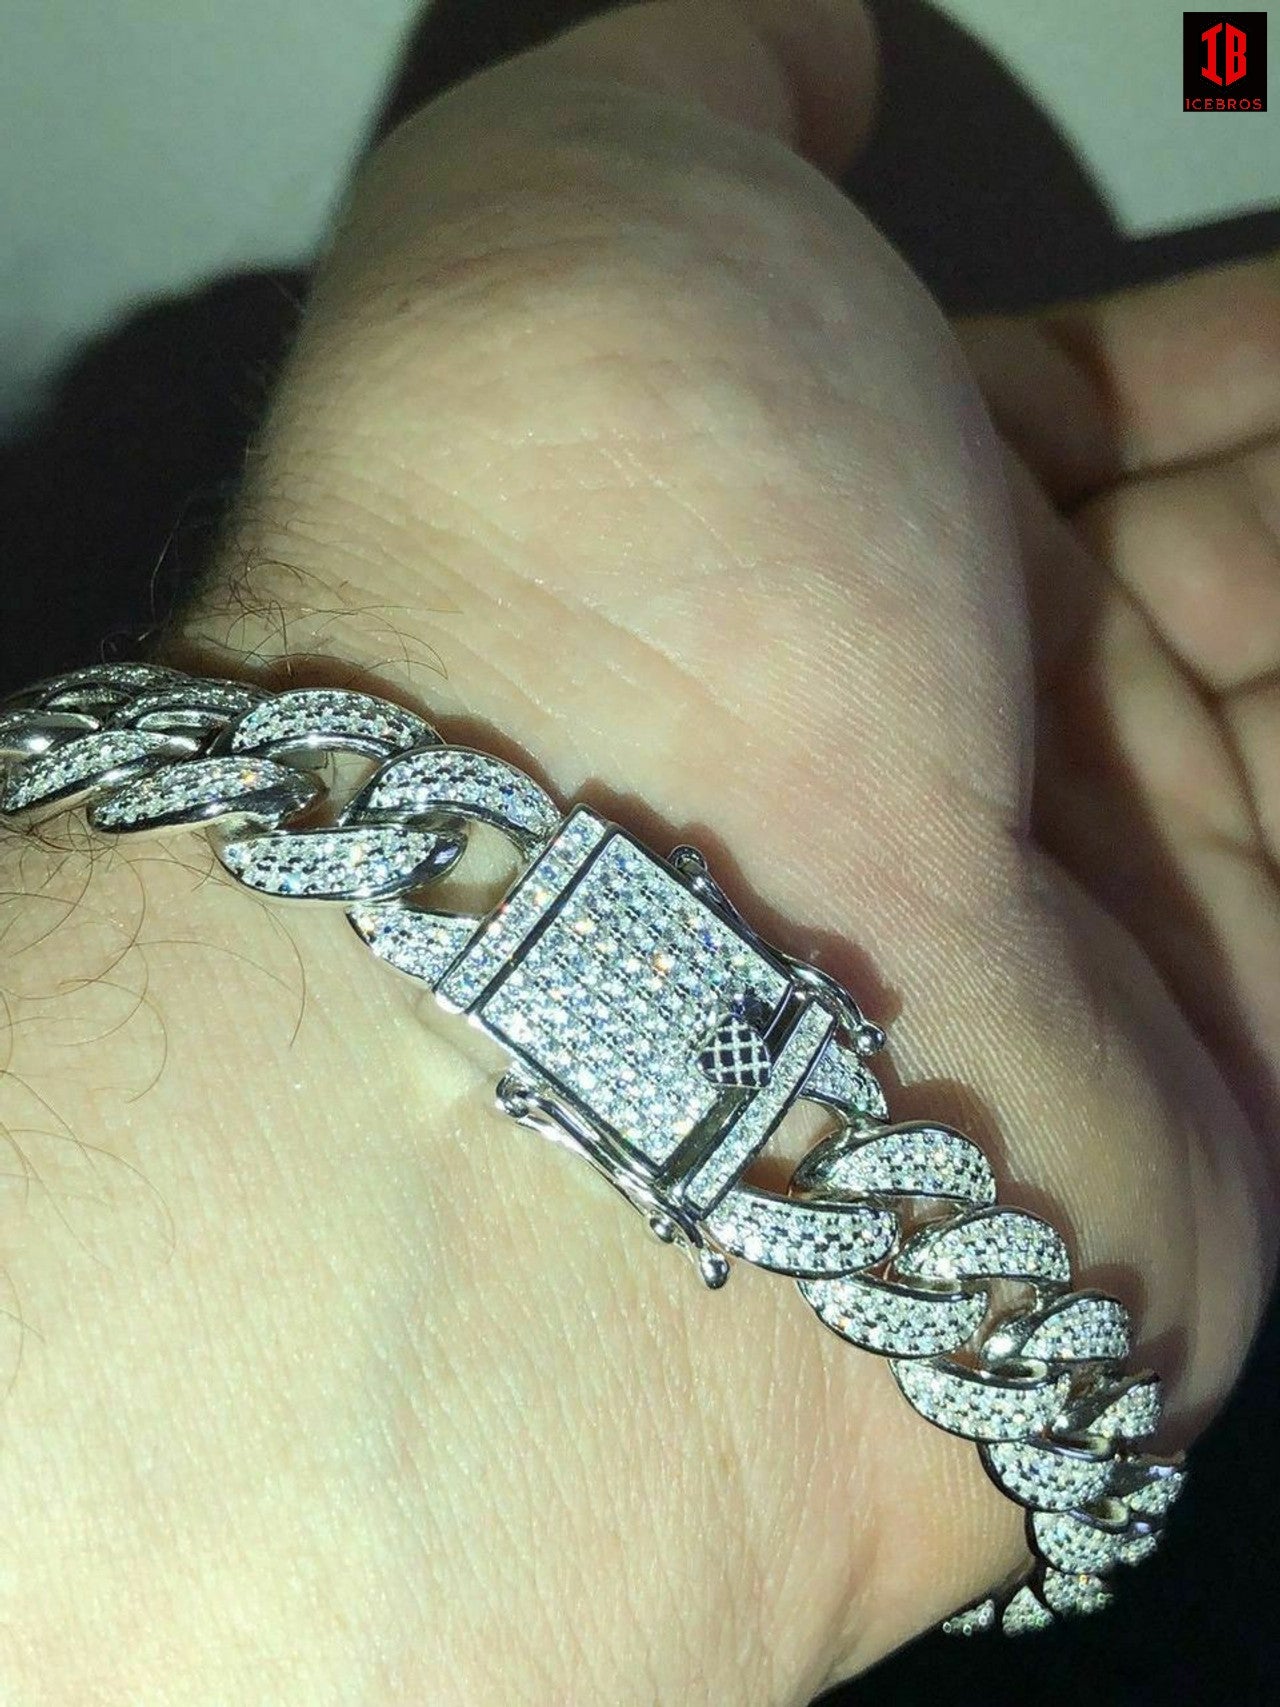 WHITE GOLD Mens Miami Cuban Link Bracelet Real Icy Solid 925 Silver Man Made Diamonds 12mm Iced